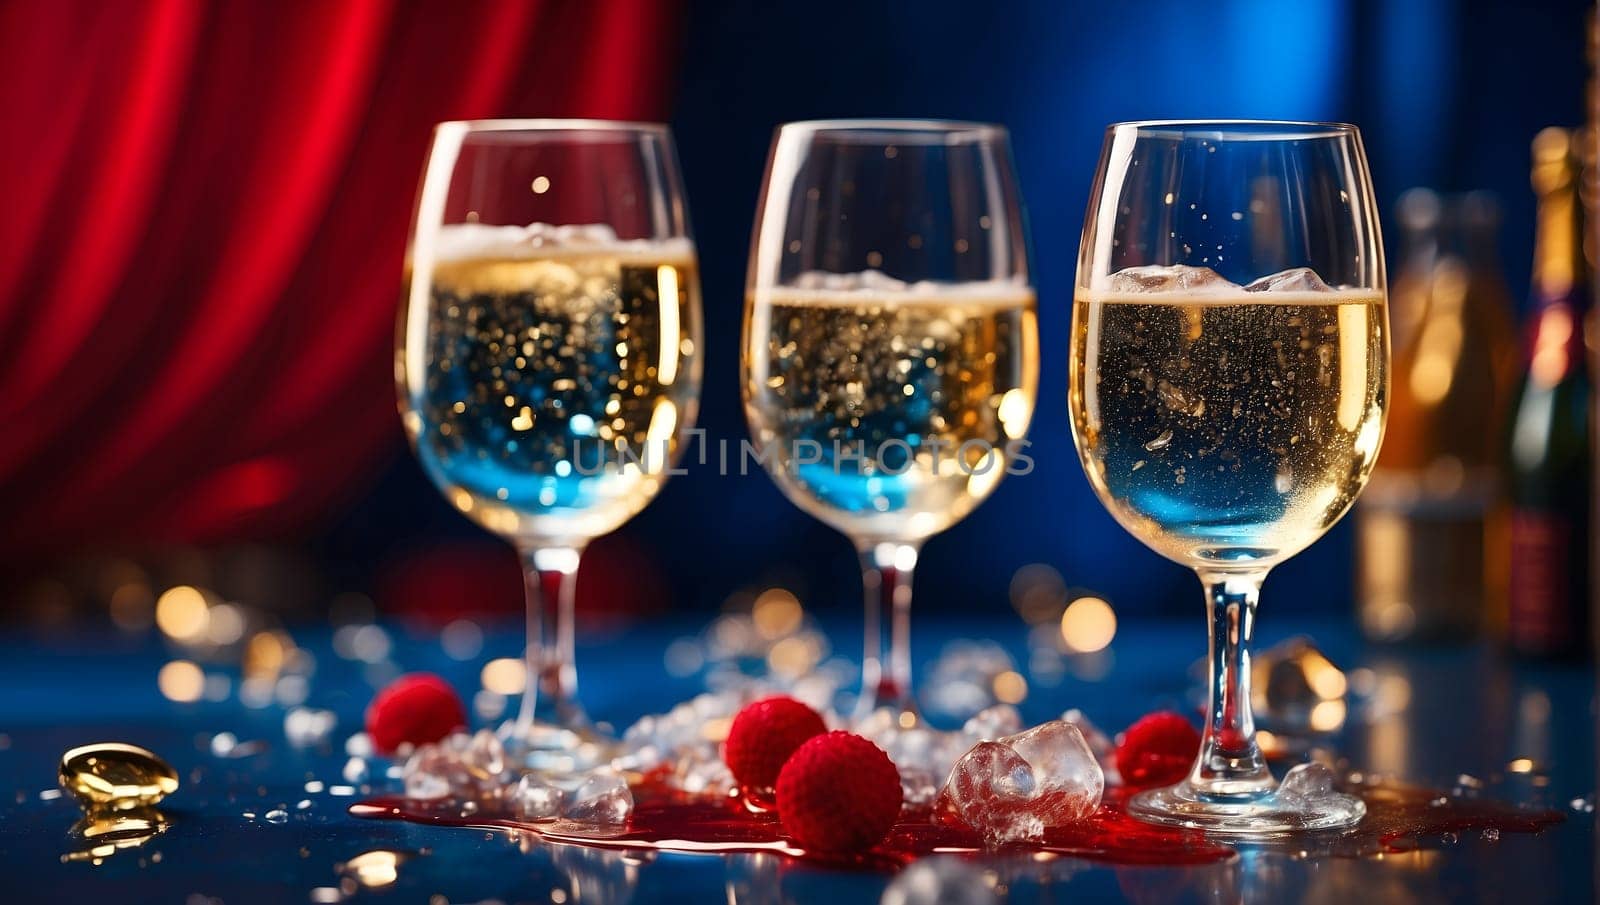 champagne three glasses on a red and blue dark background by Севостьянов